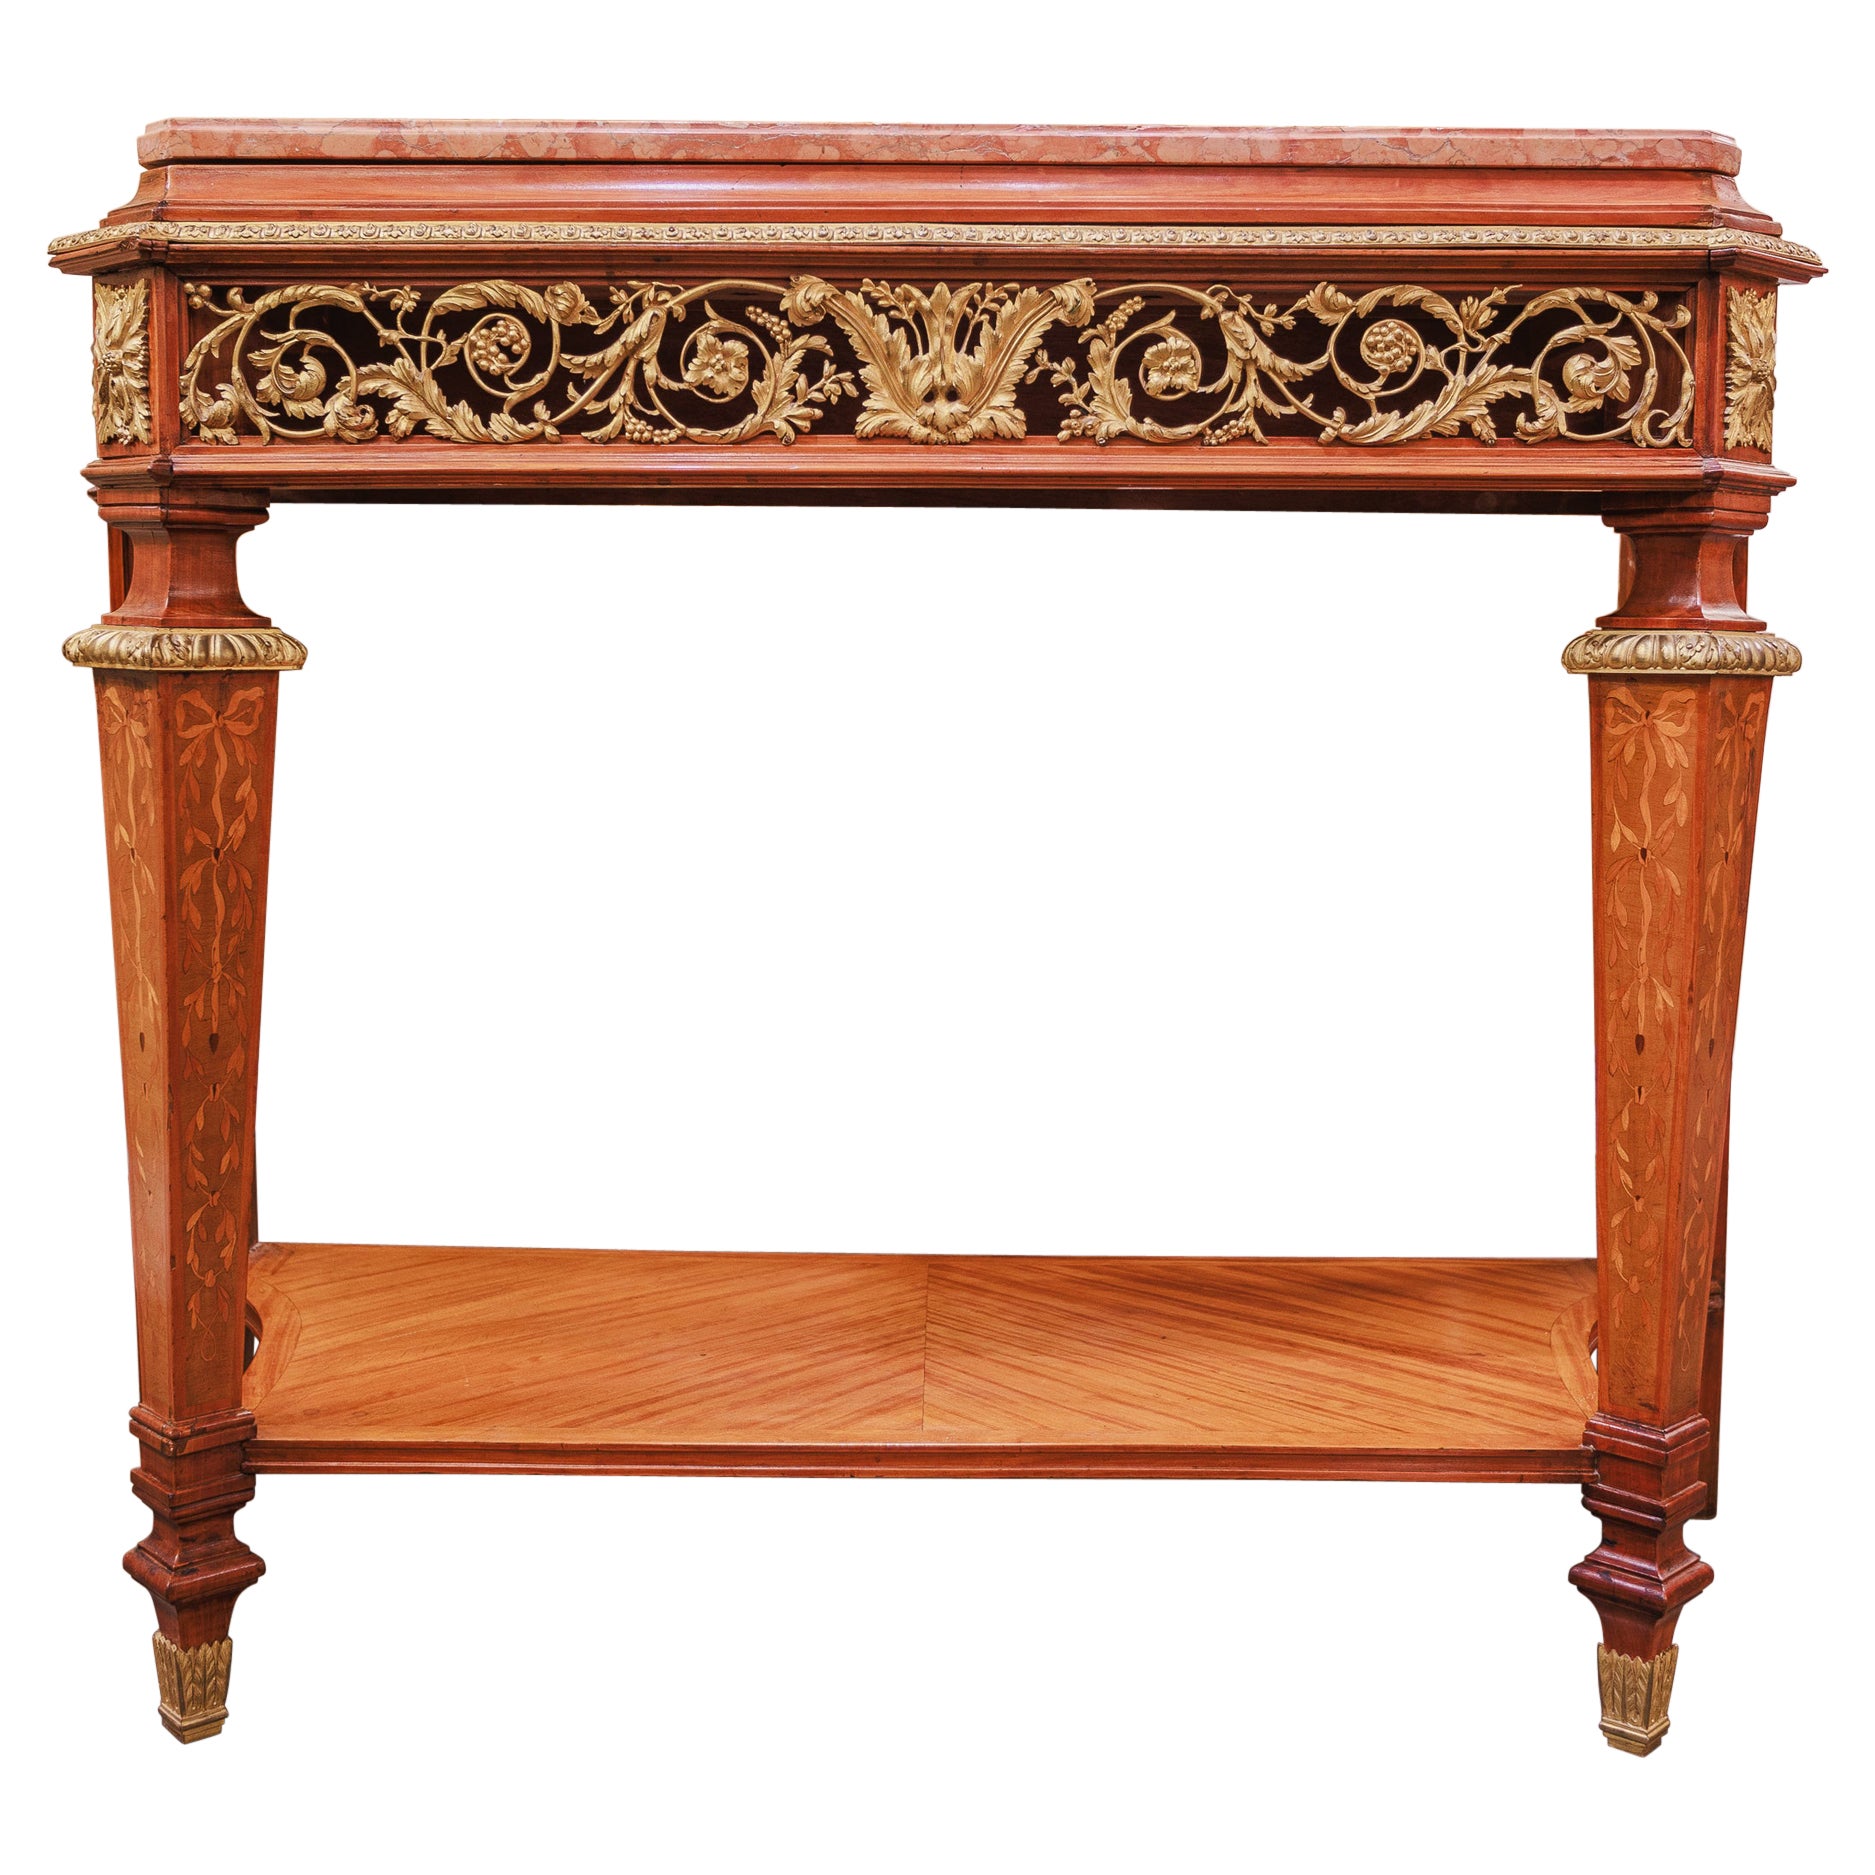 A fine 19th century French mahogany and gilt bronze console by Maison Forest For Sale